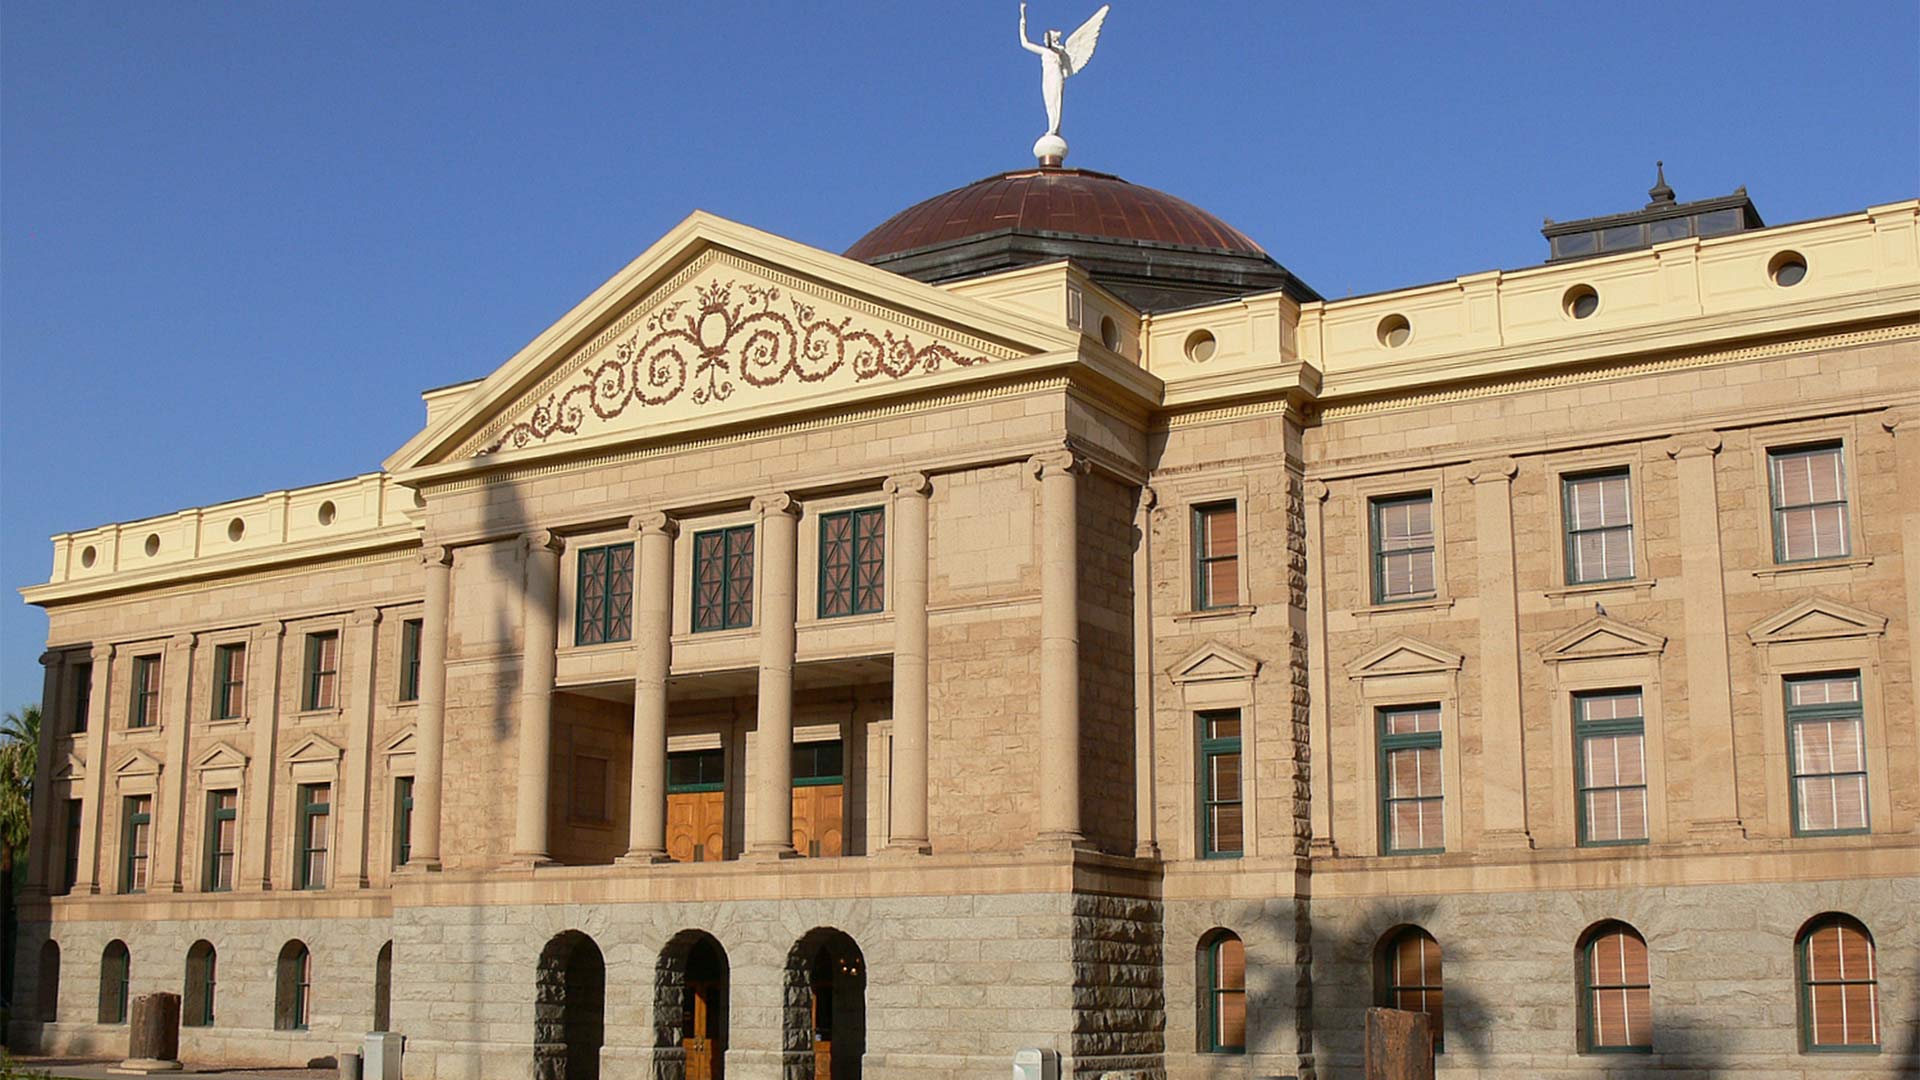 The Arizona State Capitol building.